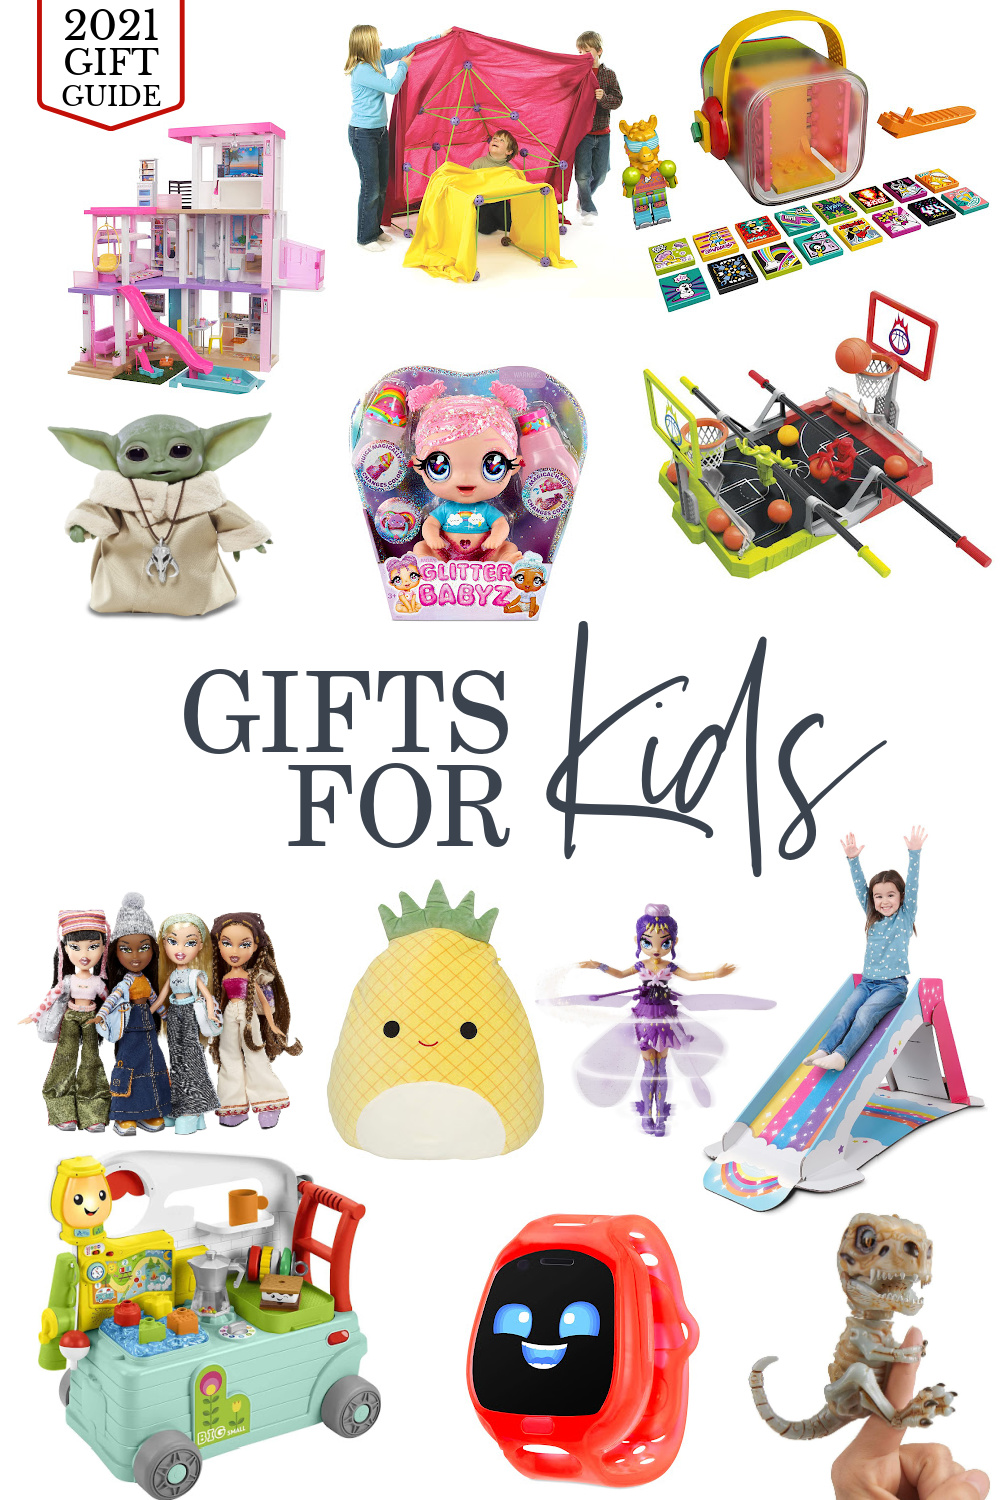 What are the best gifts for kids in 2021? This holiday season, get more bang for your buck with these great gifts.